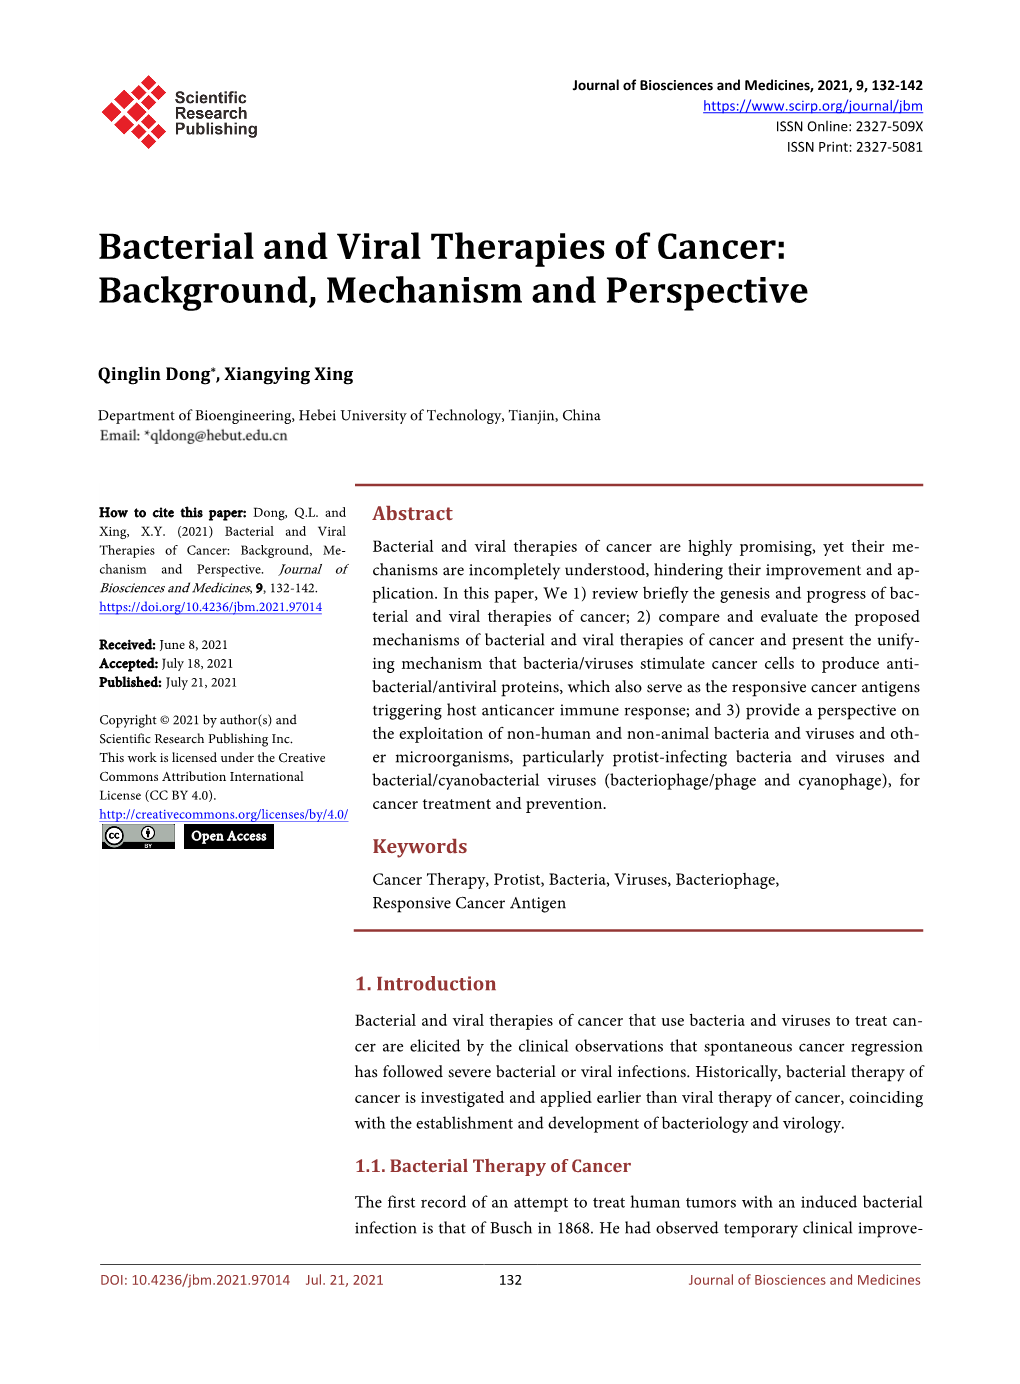 Bacterial and Viral Therapies of Cancer: Background, Mechanism and Perspective